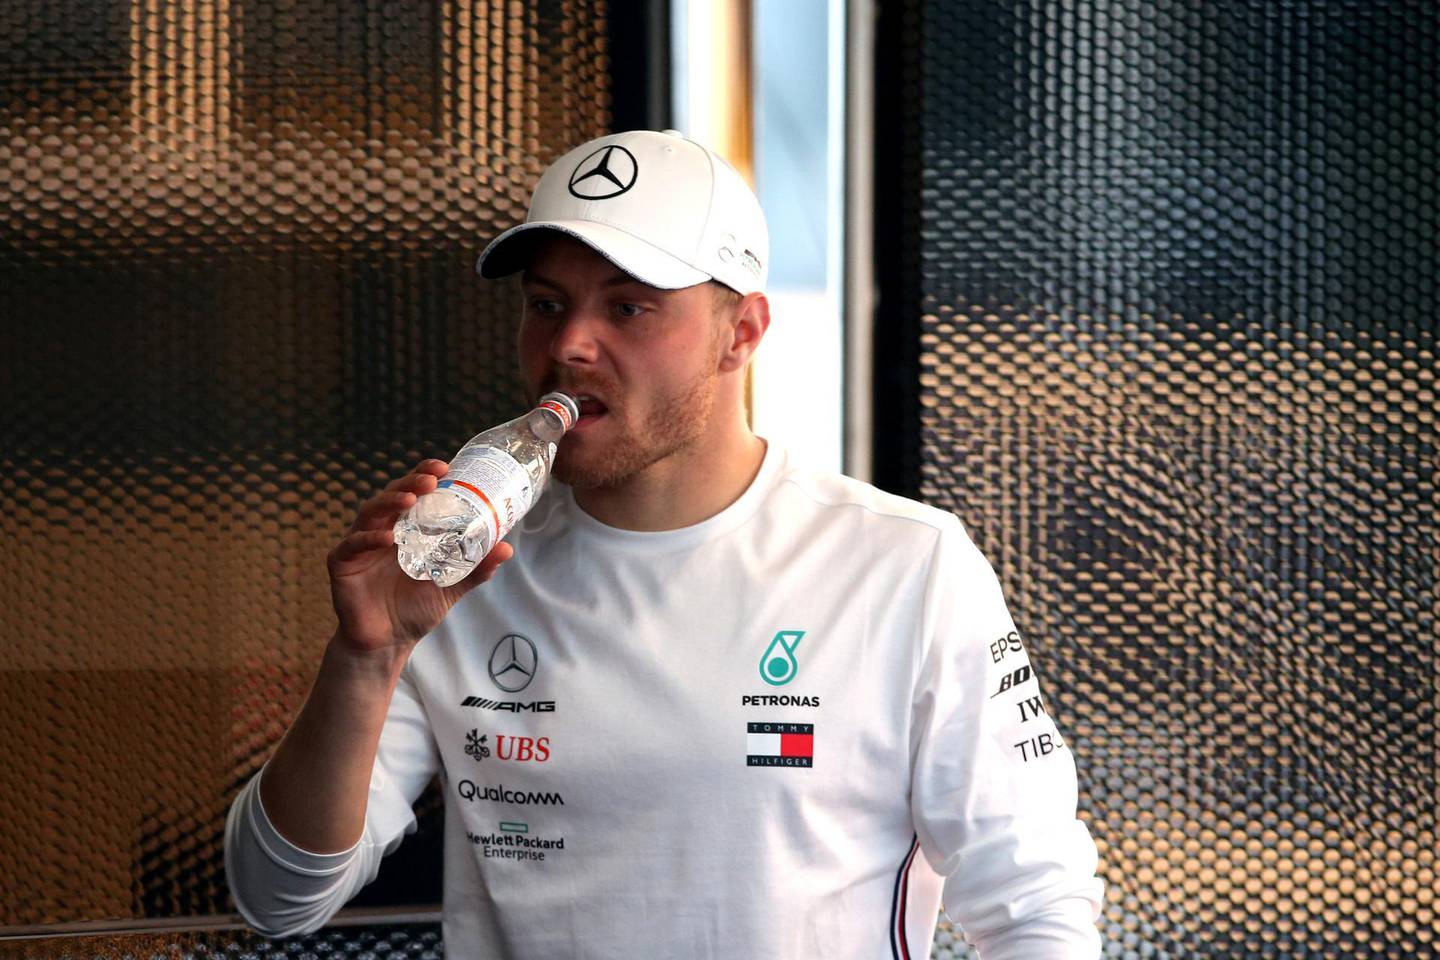 MONTMELO, SPAIN - FEBRUARY 27: Valtteri Bottas of Finland and Mercedes GP drinks water during day two of F1 Winter Testing at Circuit de Catalunya on February 27, 2019 in Montmelo, Spain. (Photo by Charles Coates/Getty Images)